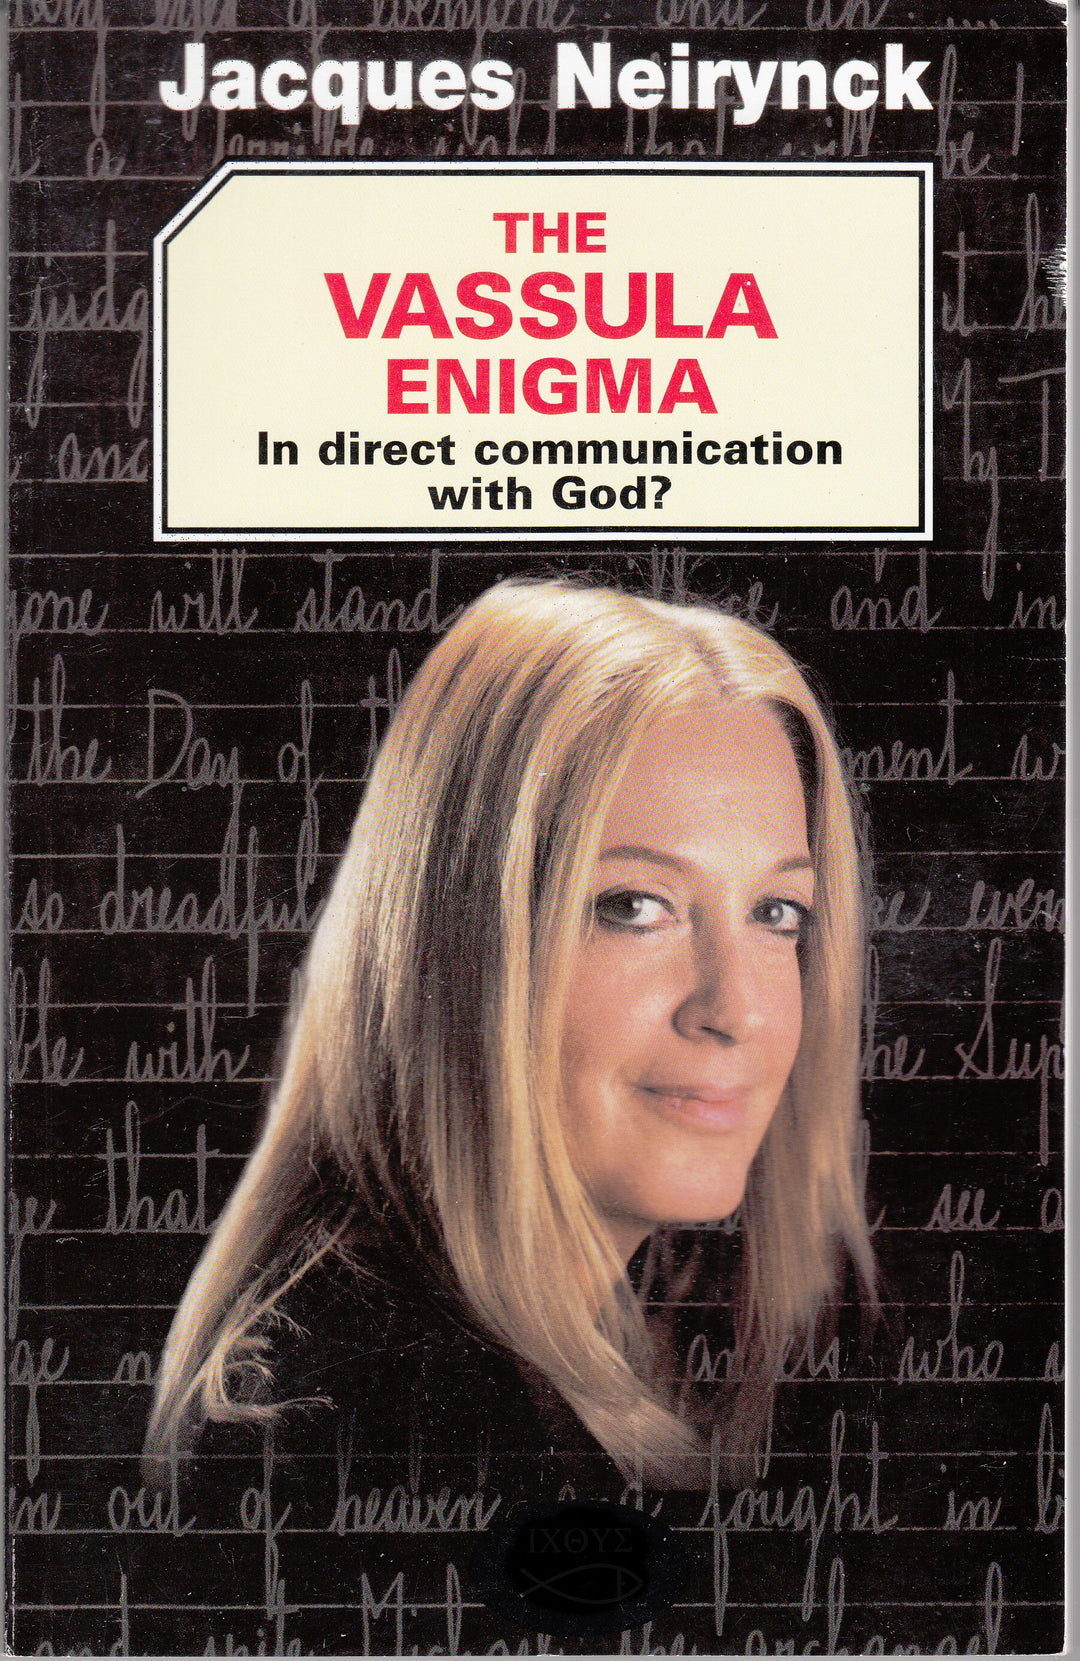 THE VASSULA ENIGMA in direct communication with God?